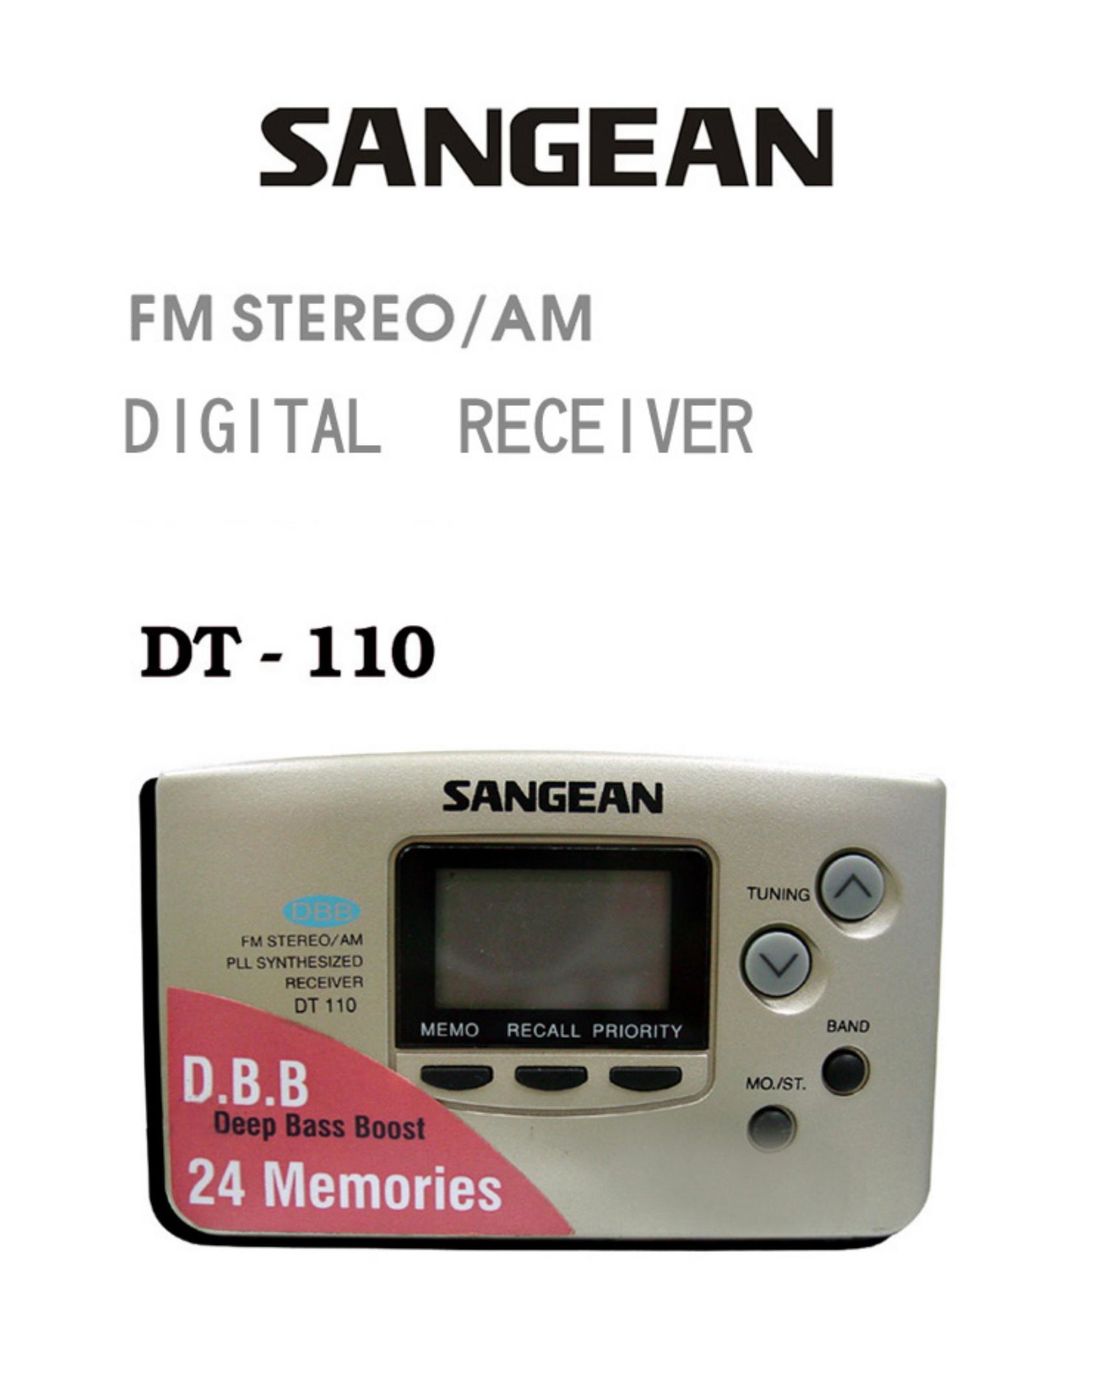 Sangean Electronics DT-110 Stereo System User Manual